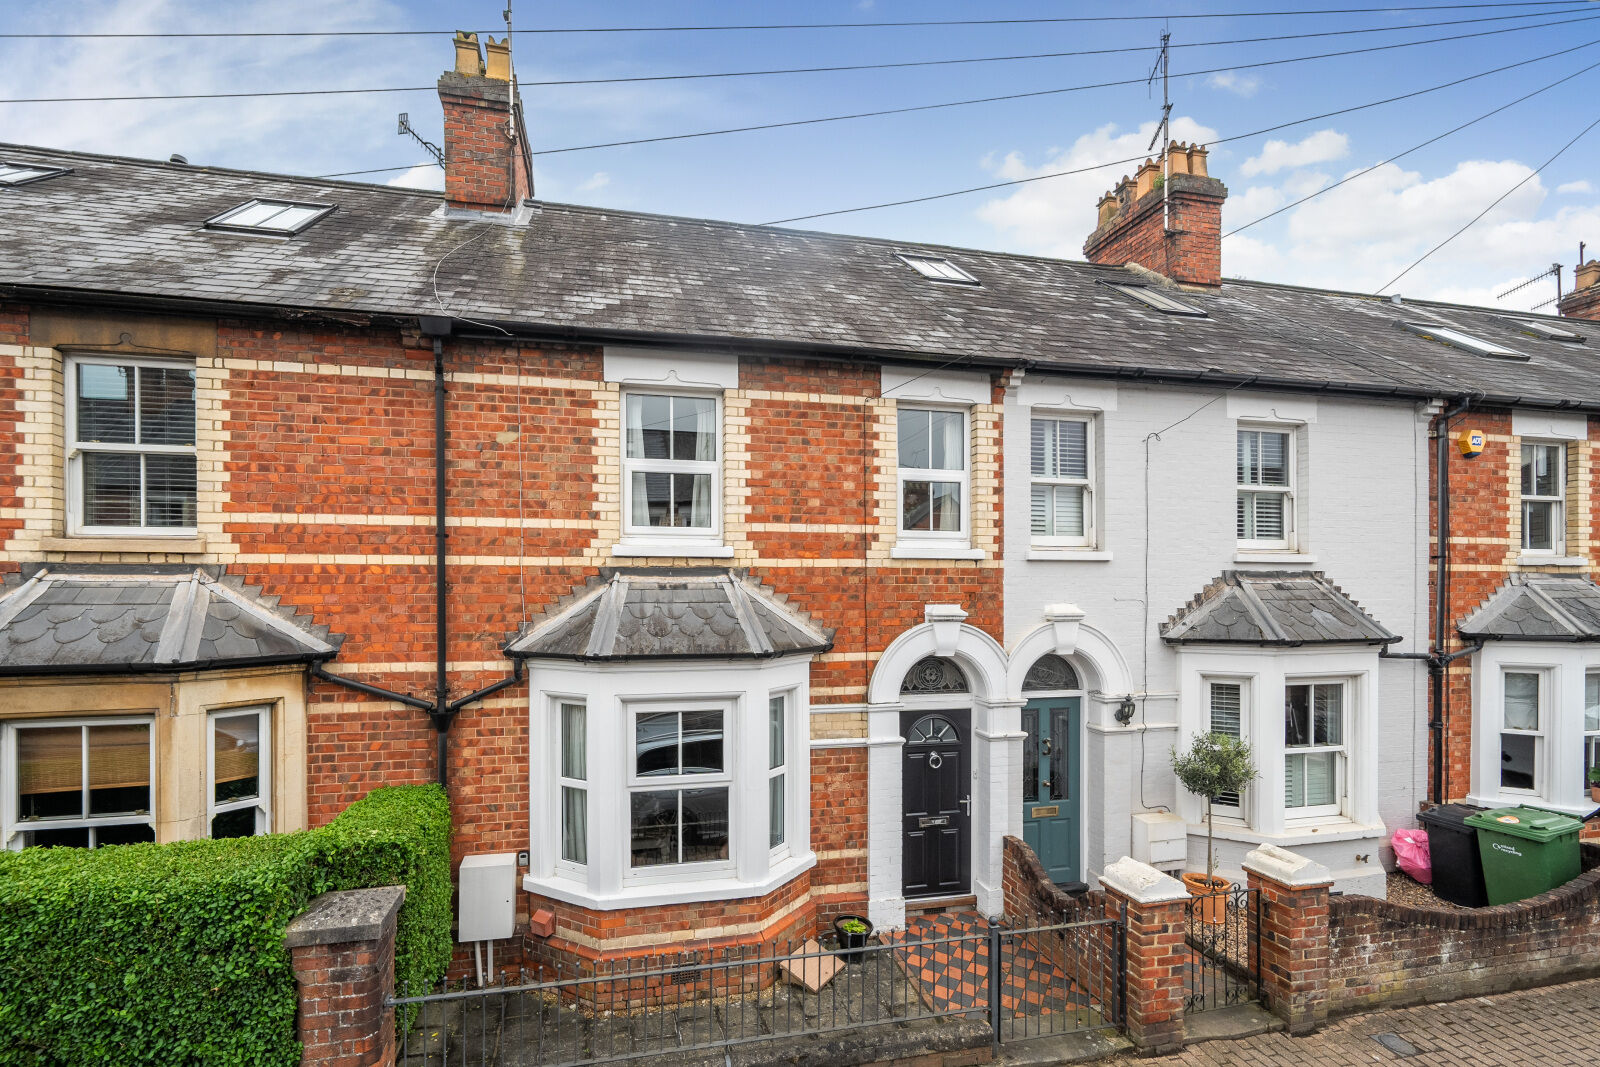 3 bedroom mid terraced house for sale Kings Road, Henley-on-Thames, RG9, main image